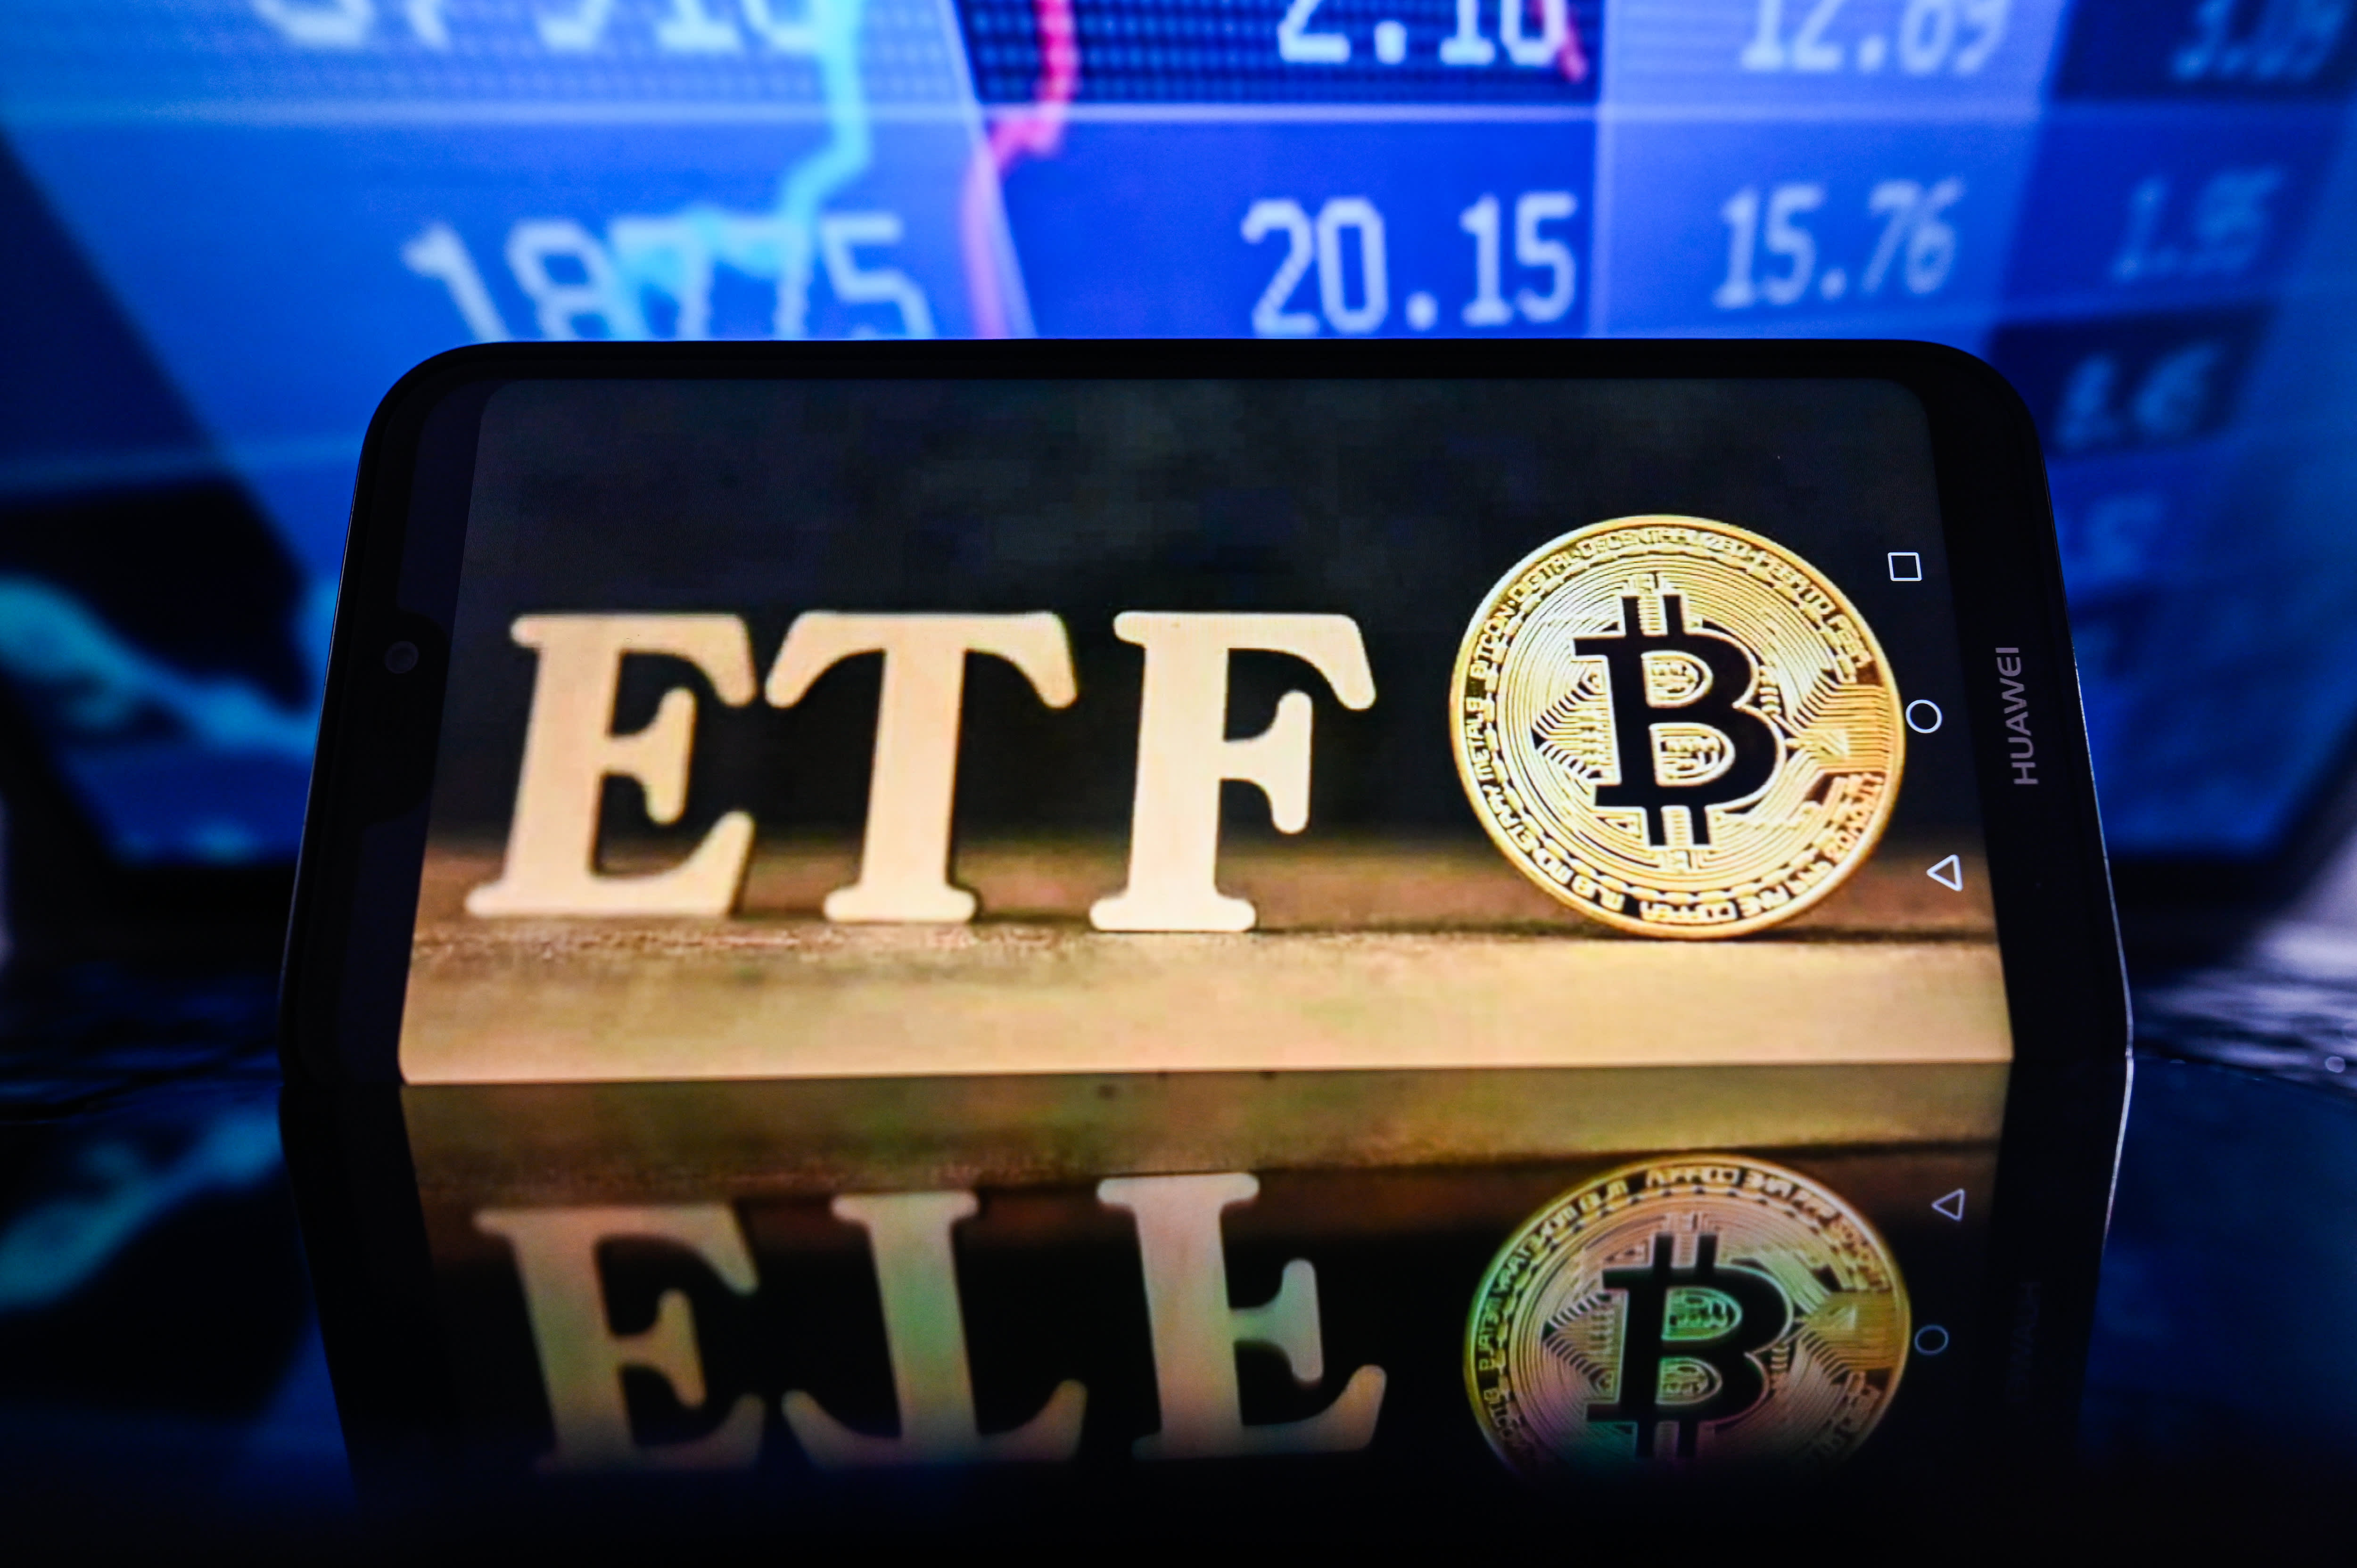 Cryptocurrency investors are eagerly awaiting the SEC’s ruling on Bitcoin ETFs